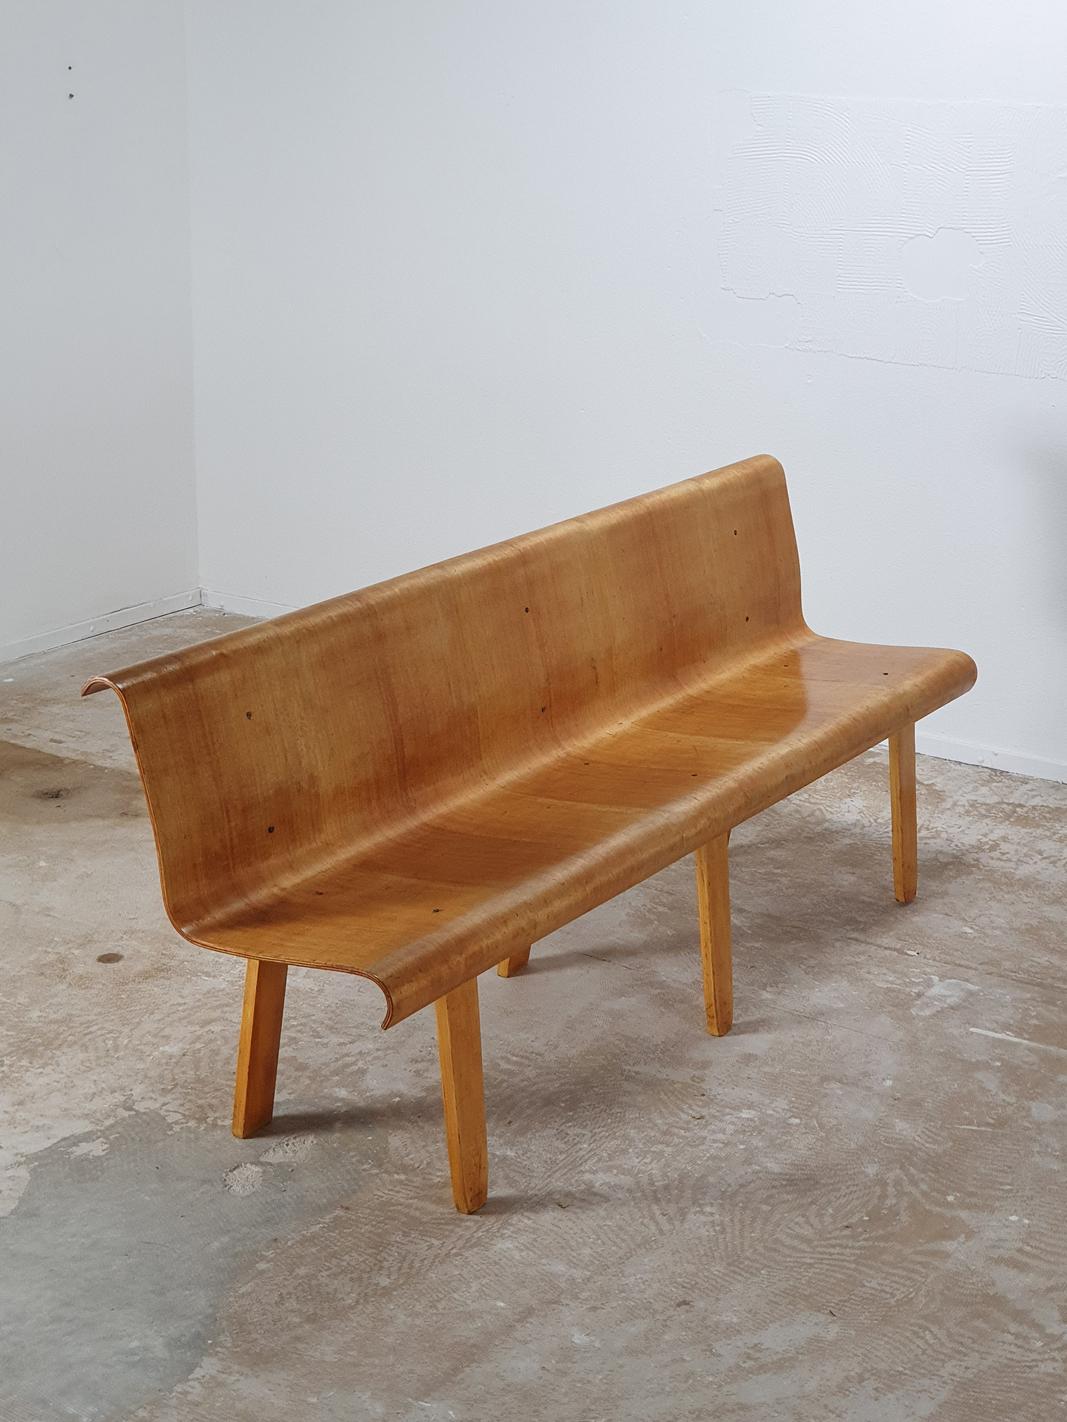 This plywood bench has only had two owners. The first: a primary school in Amsterdam, left vacant for many years; until the second: a passionate design collector, who saved the plywood bench from demolition. The bench has delicate seating,